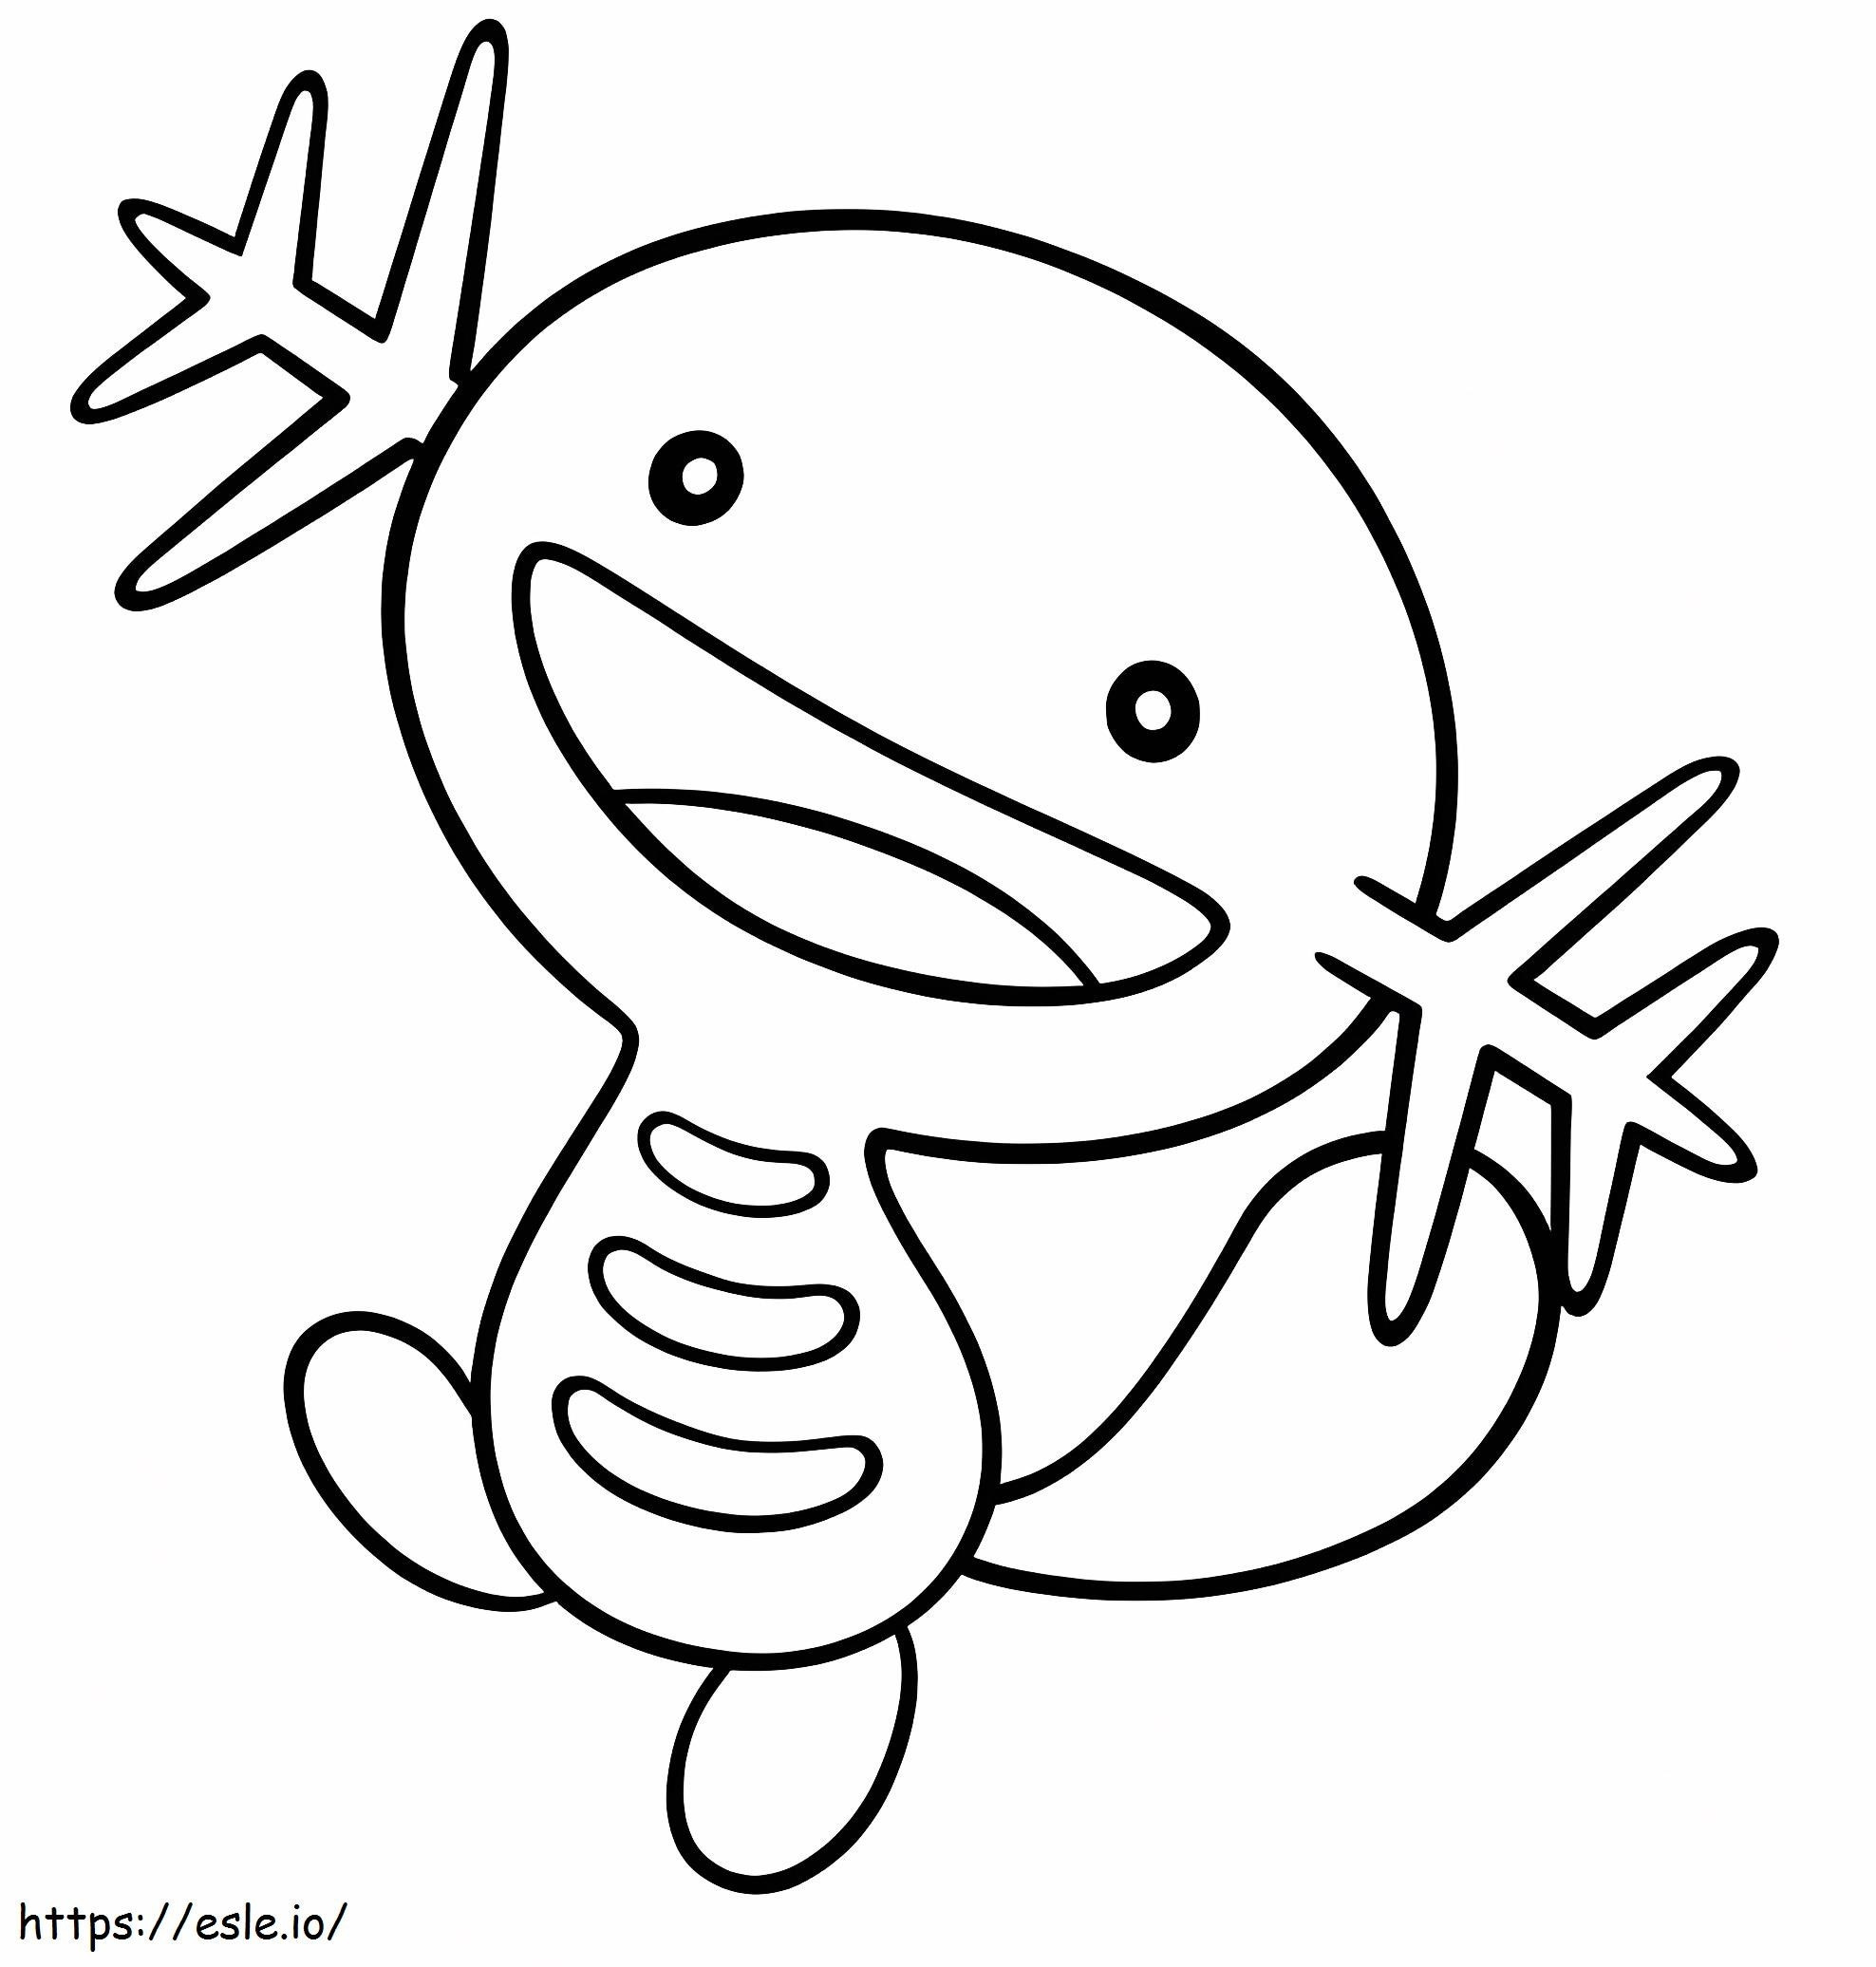 Pokemon Wooper coloring page